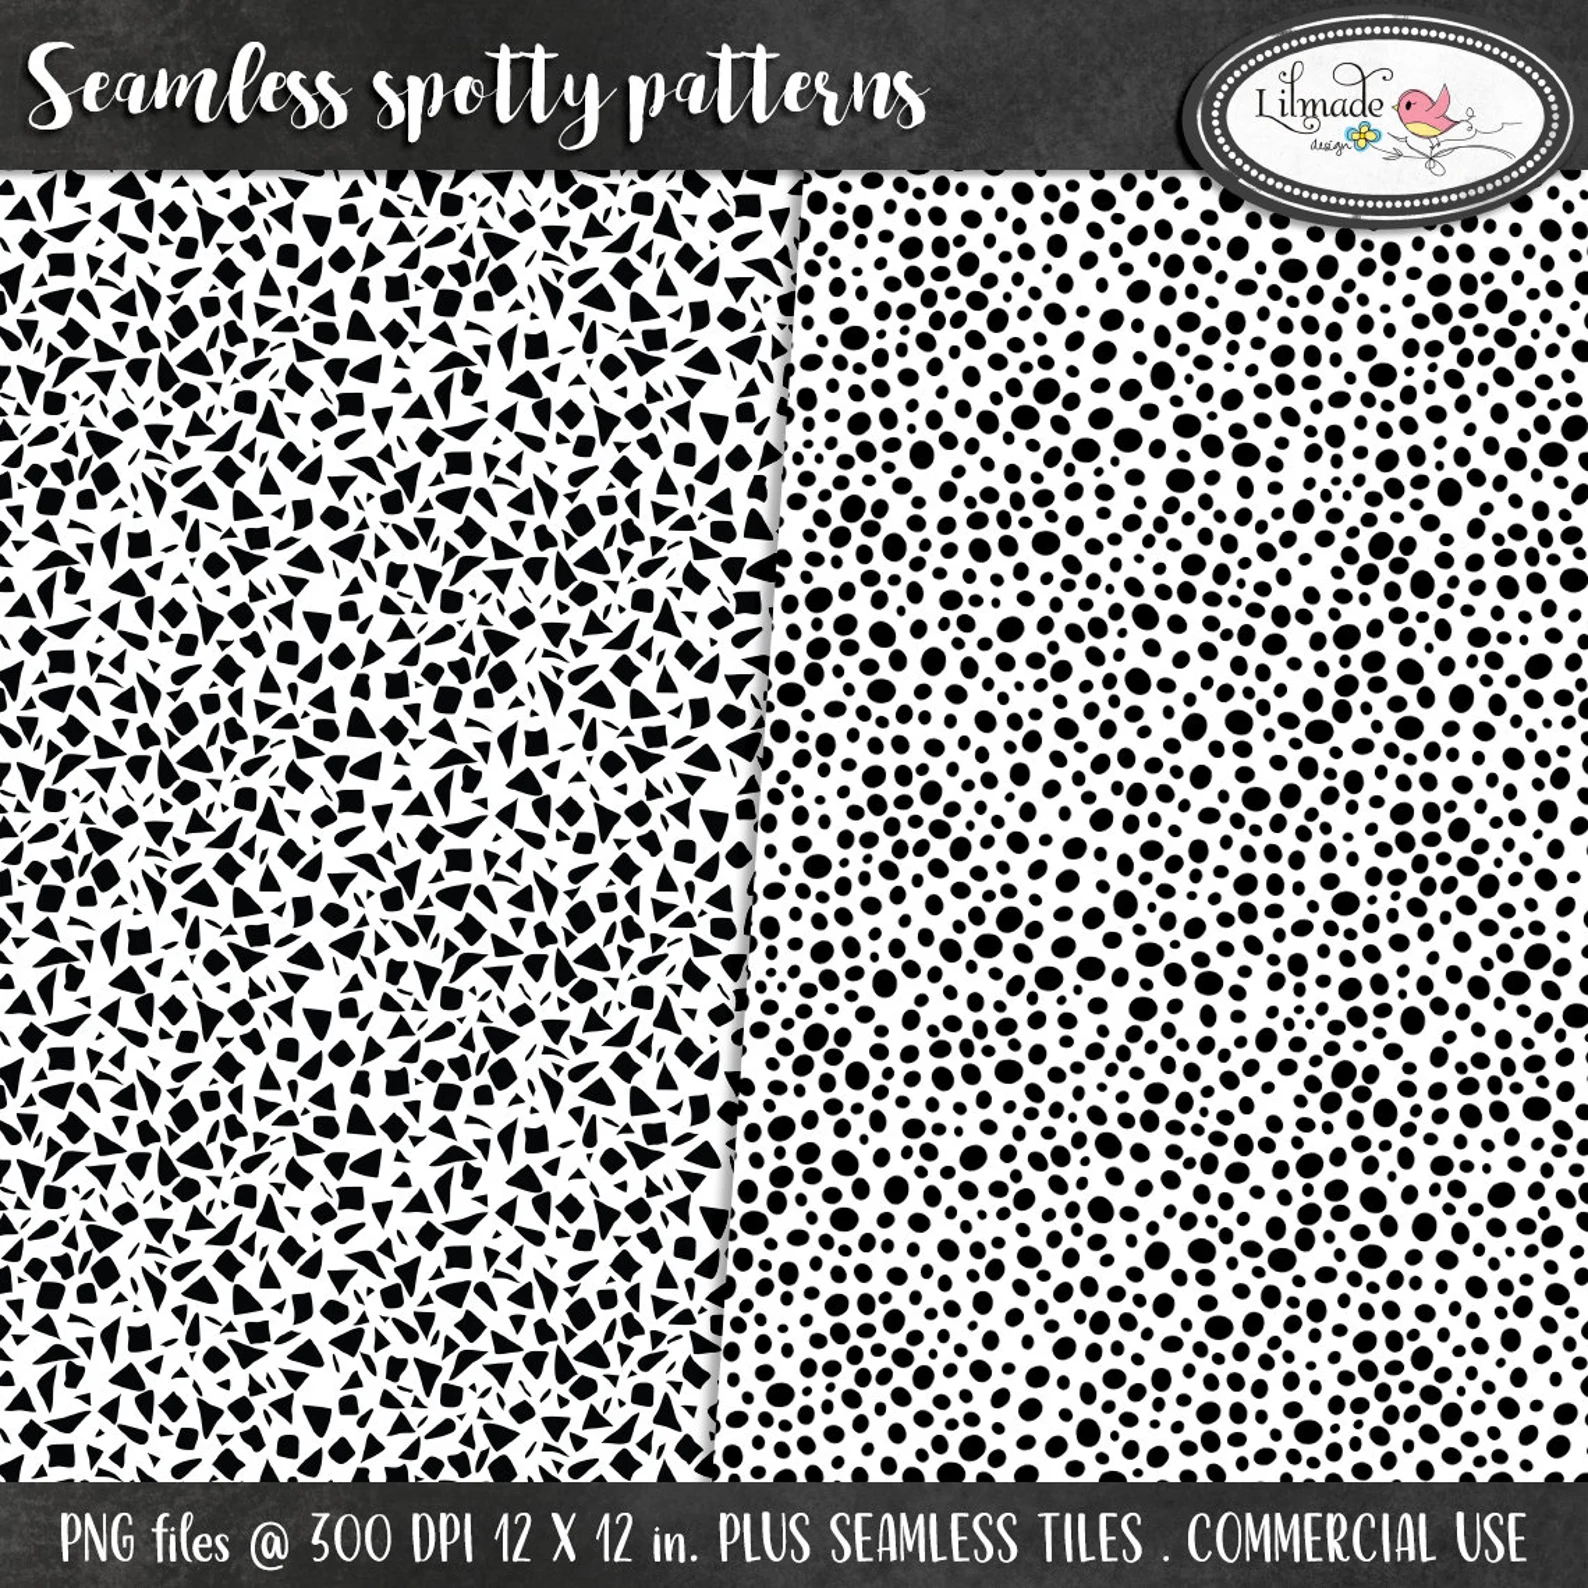 Seamless-spotty-and-terrazo-patterns for-commercial-use-dalmatian-pattern